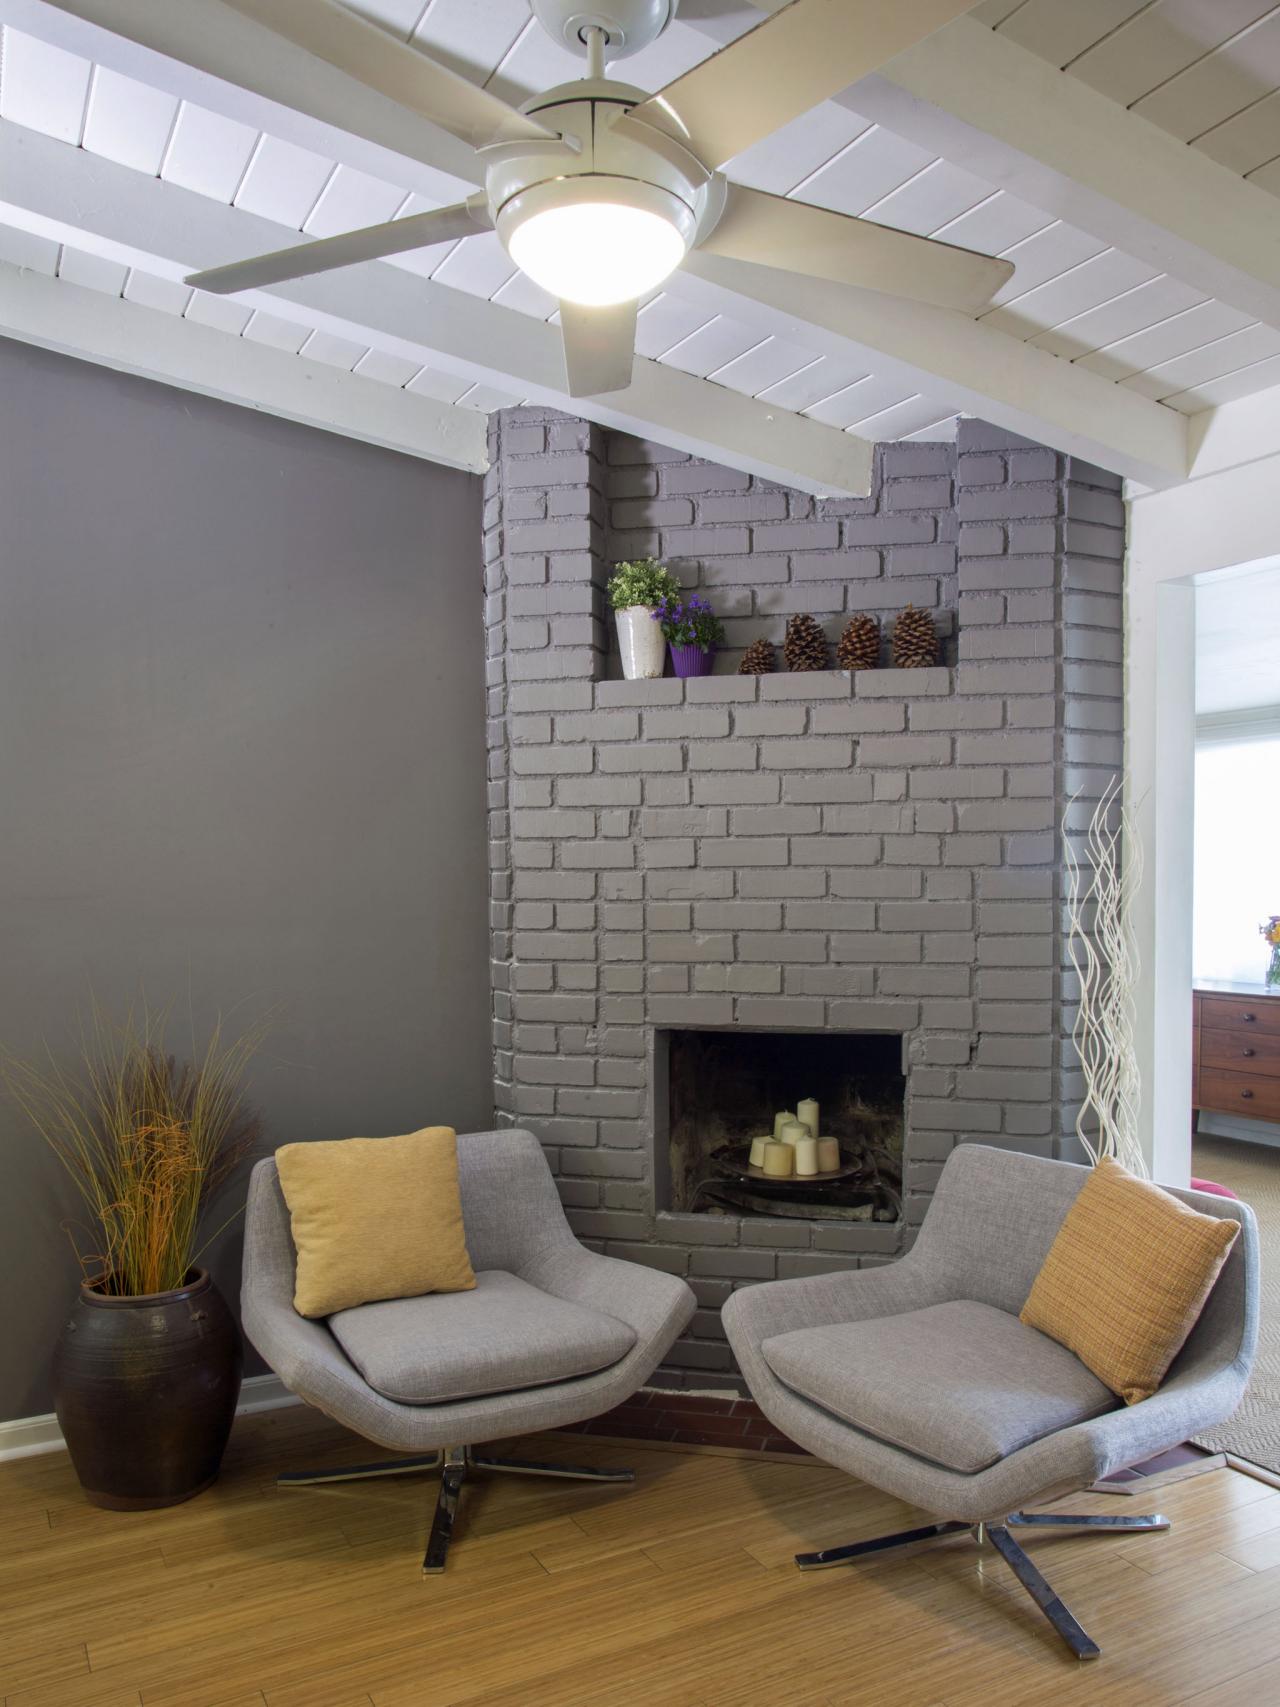 HGTV.com shares 15 beautiful painted brick fireplaces for every design style.